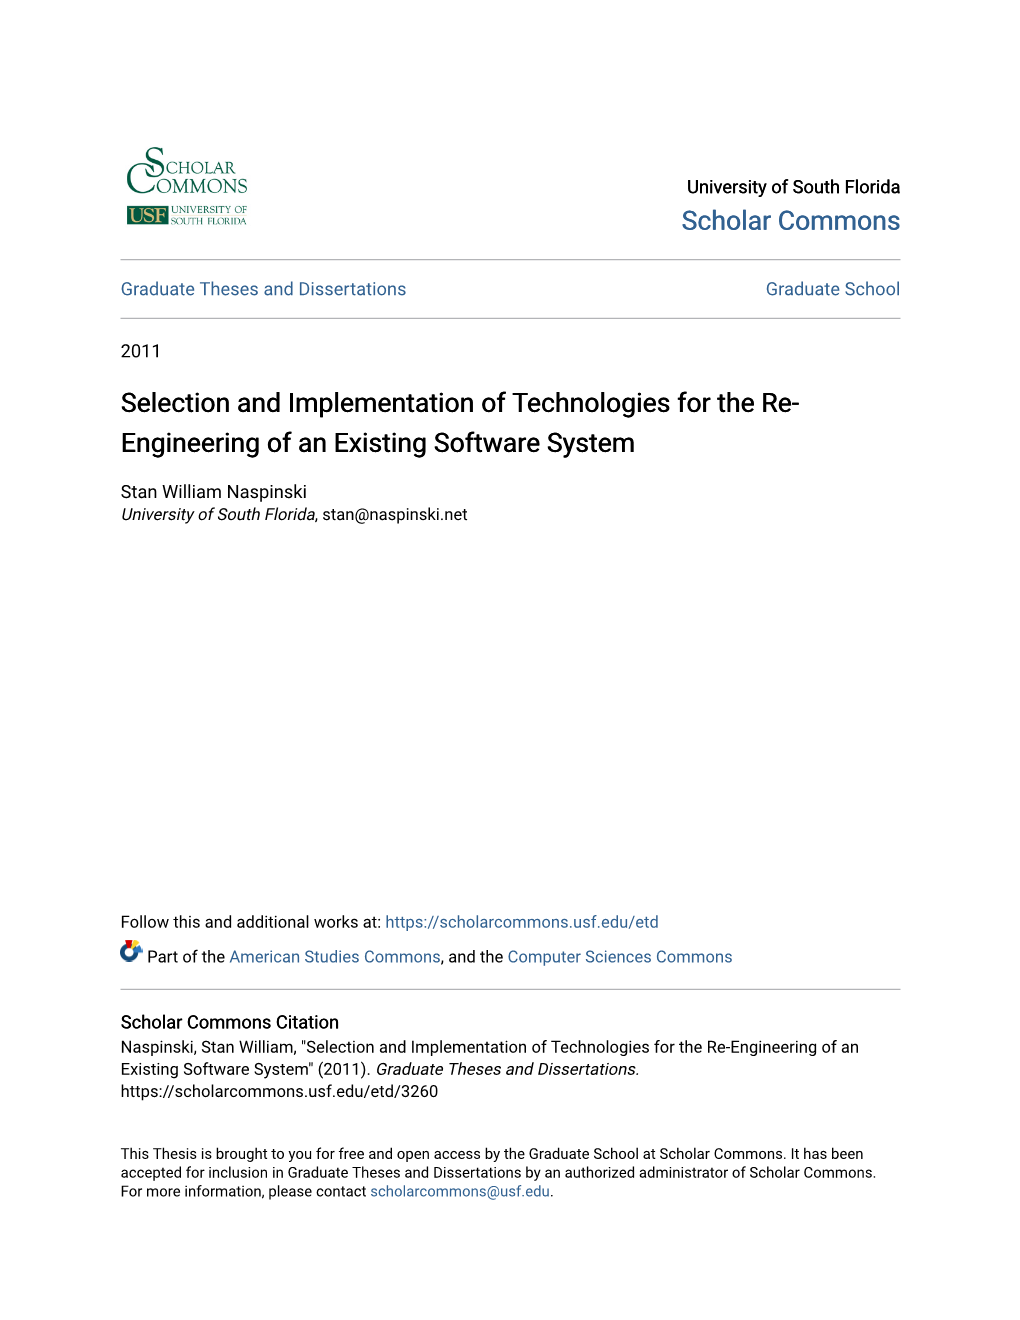 Selection and Implementation of Technologies for the Re-Engineering of an Existing Software System" (2011)